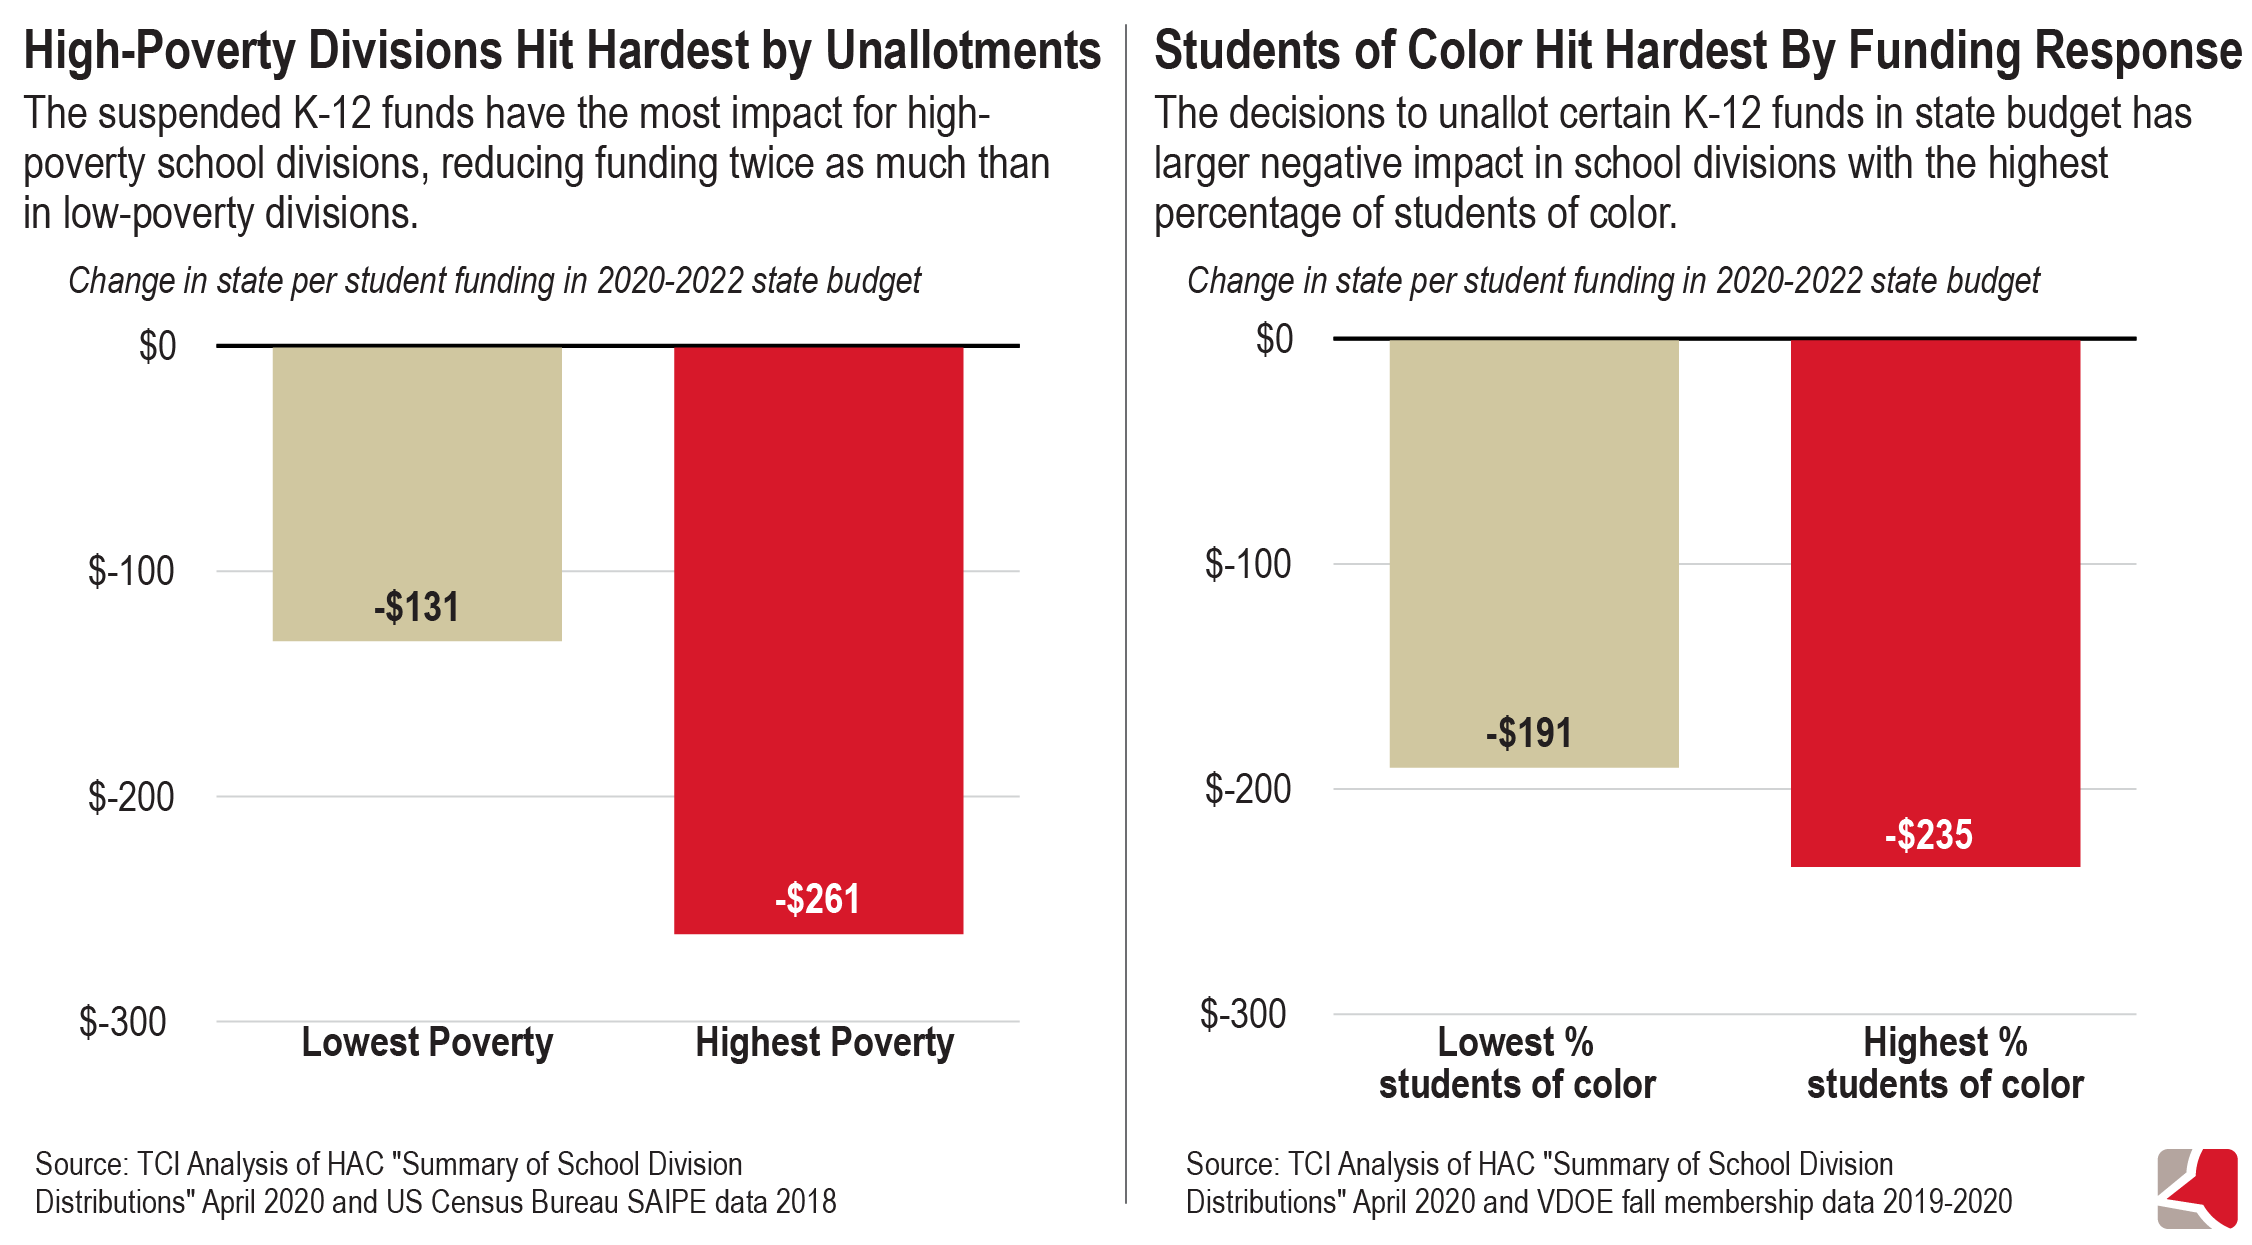 Two bar graphs showing changes in state per-student funding in the 2020-2022 state budget due to unallottments.  The first shows that the highest poverty divisions would see a decrease of $261, while the lowest poverty divisions would see an average decrease of $131.  The second graphs show that divisions with the highest share of students of color would see an average decrease of $235, while divisions with the lowest shares of students of color would see an average decrease of $191 